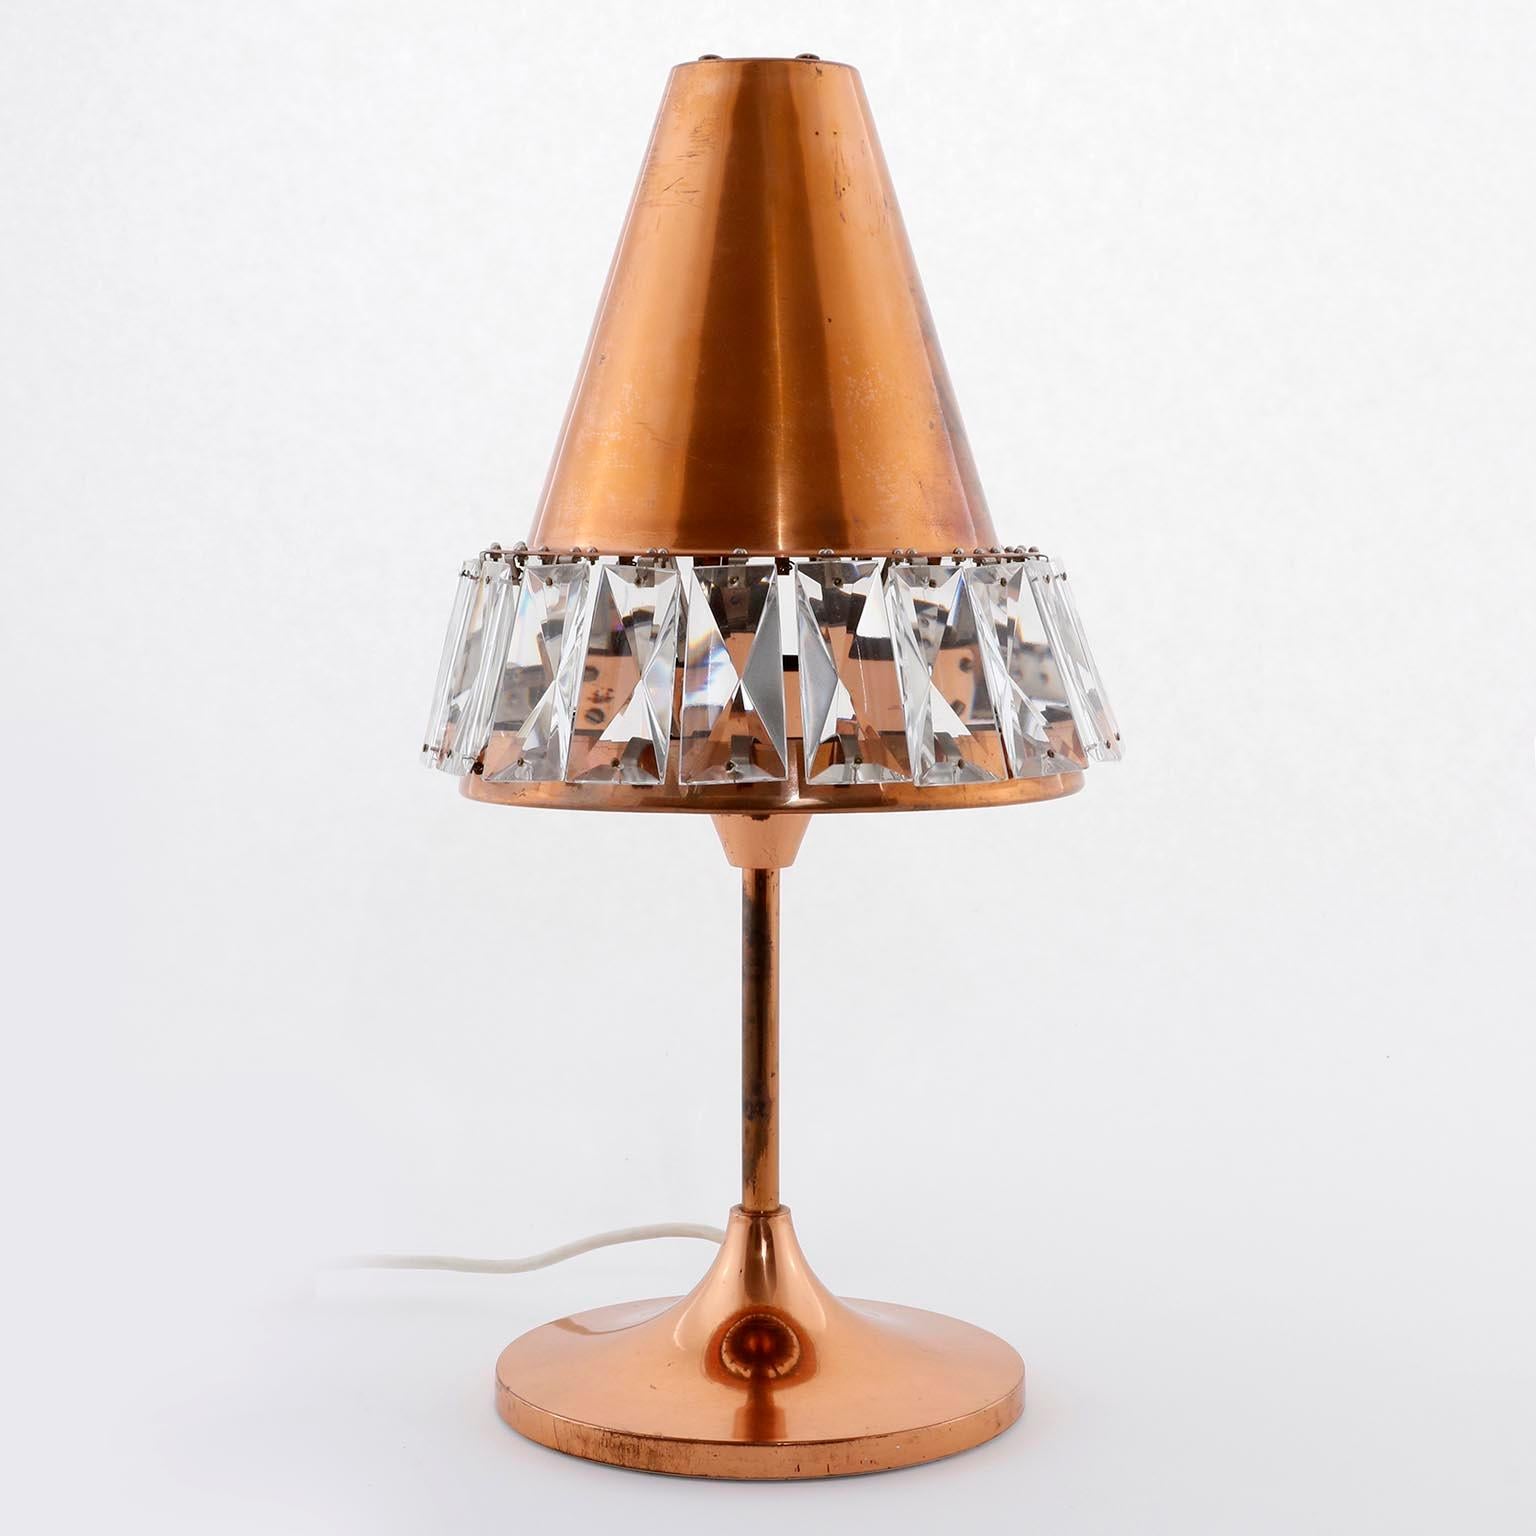 Mid-Century Modern Bakalowits Table Lamp, Patinated Copper Nickel Crystal Glass, Austria, 1960s For Sale